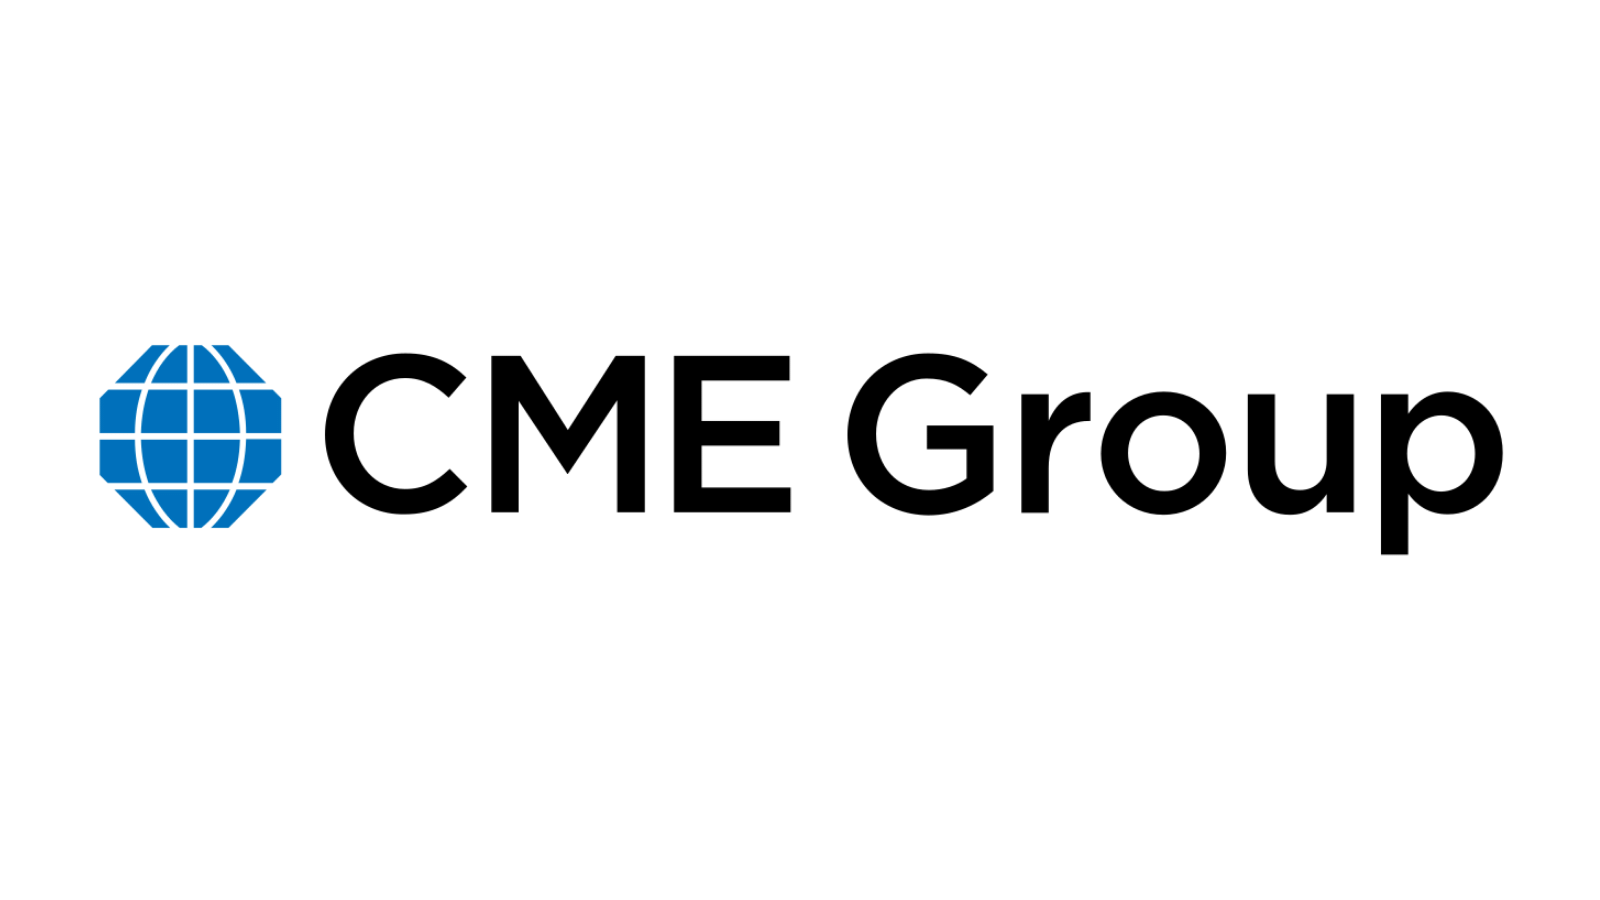 CME Group to Launch Six New E-mini Sector Index Futures on August 8